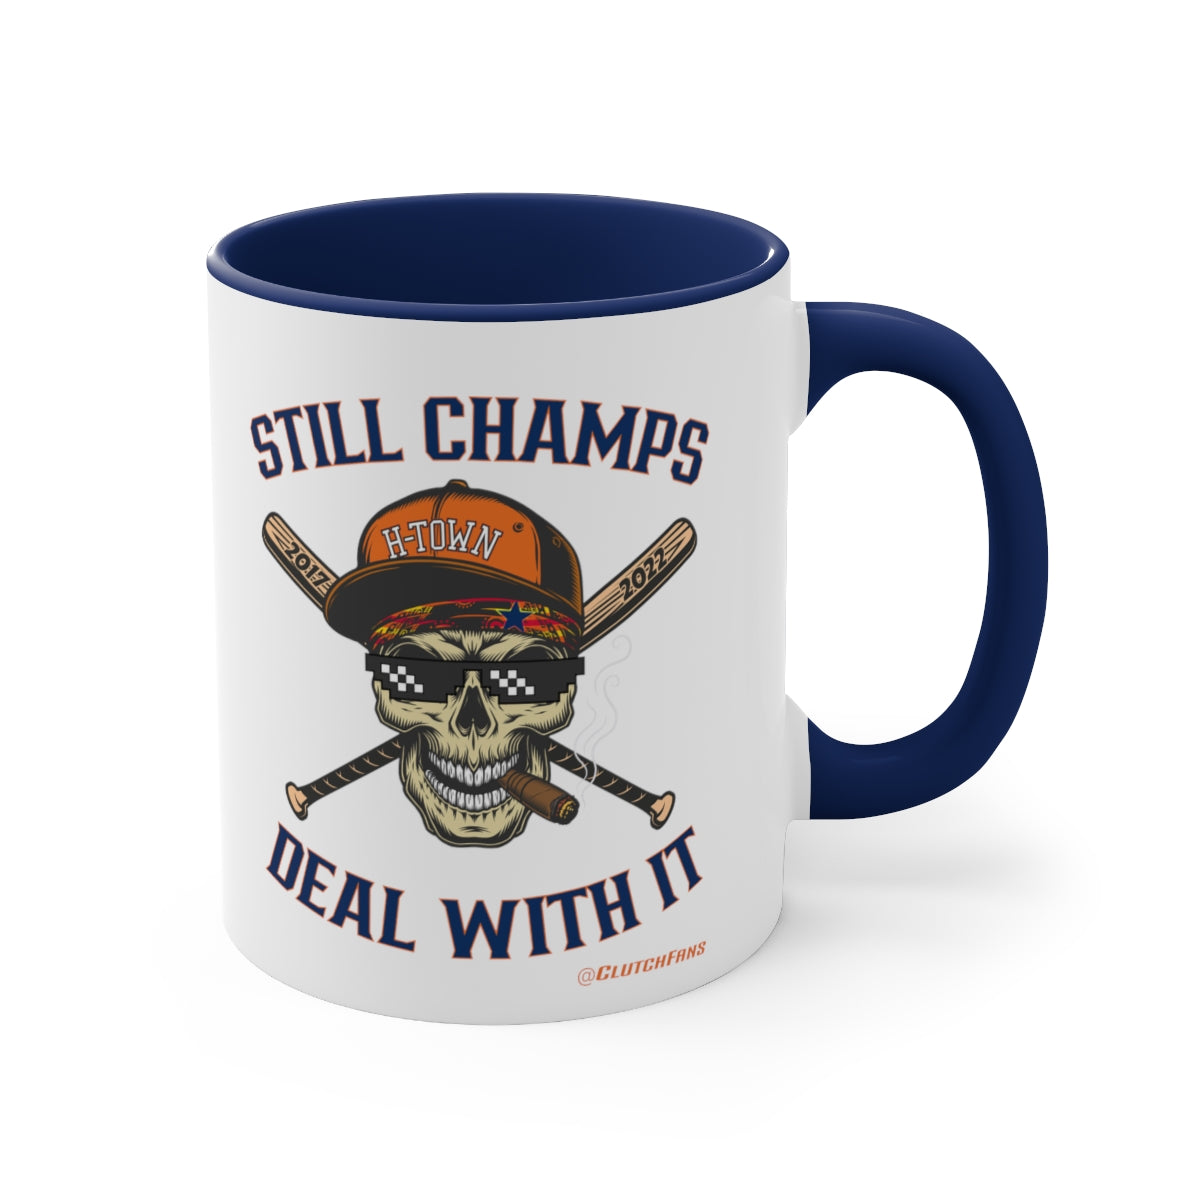 STILL CHAMPS: Deal With It! - Mug 11oz